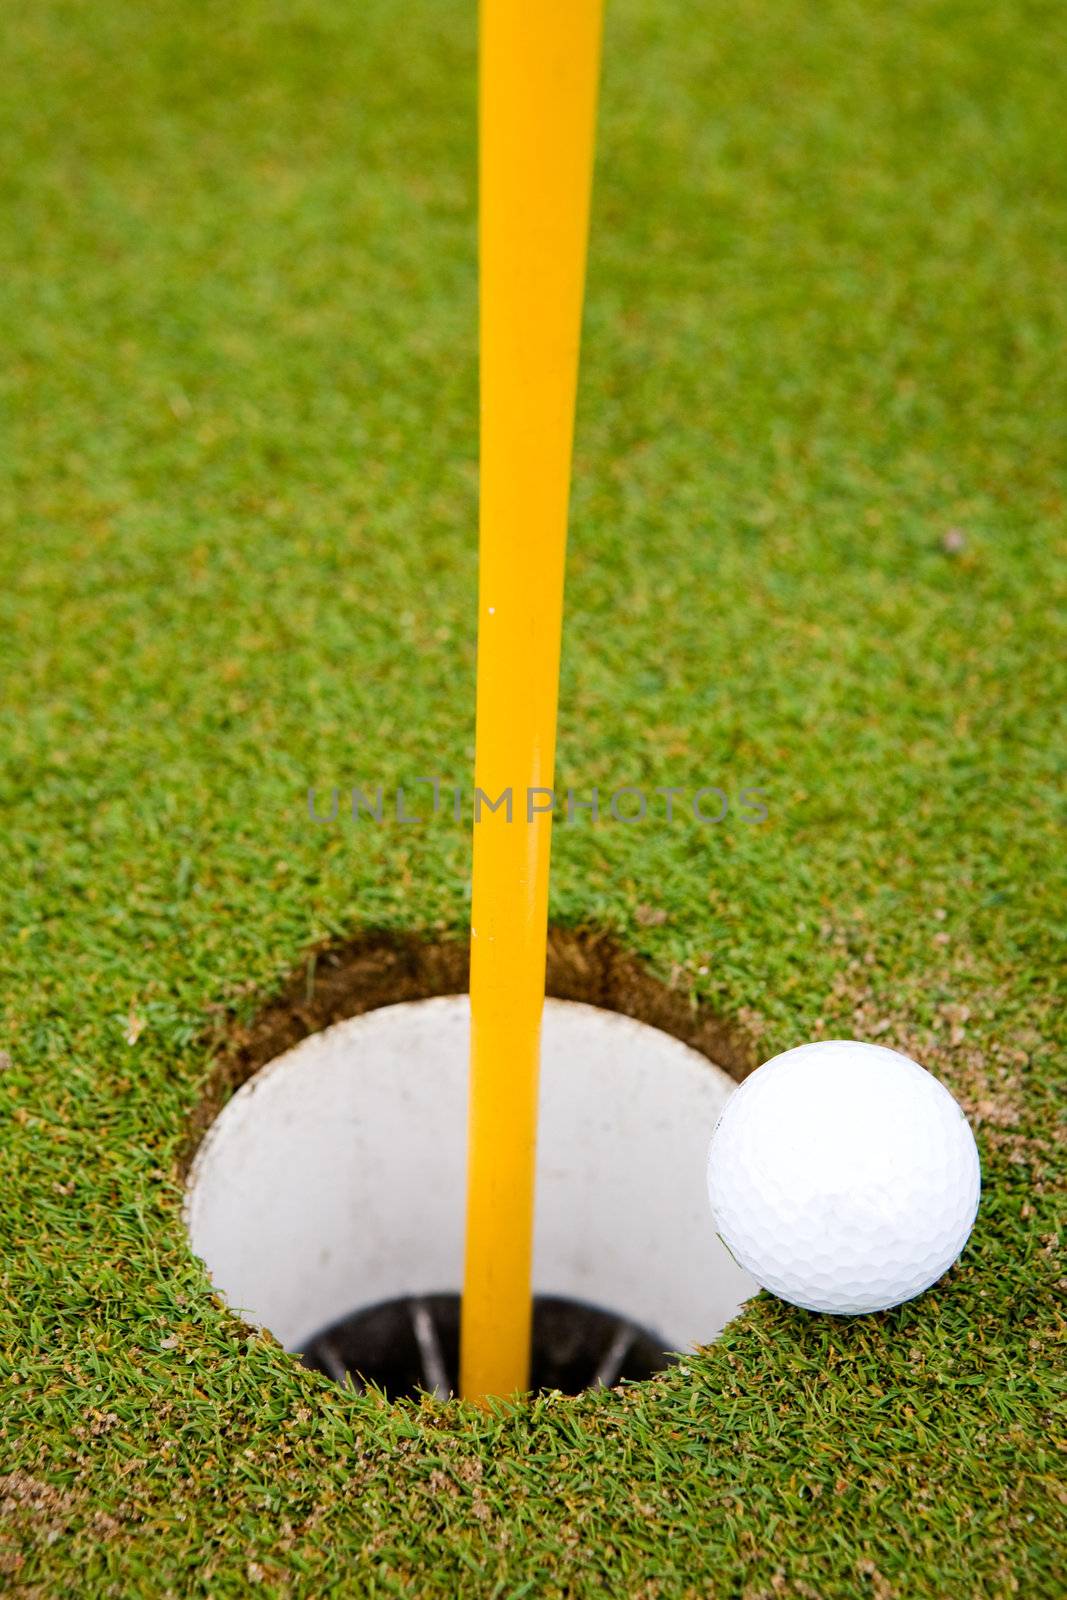 Golf ball very close to going in the hole